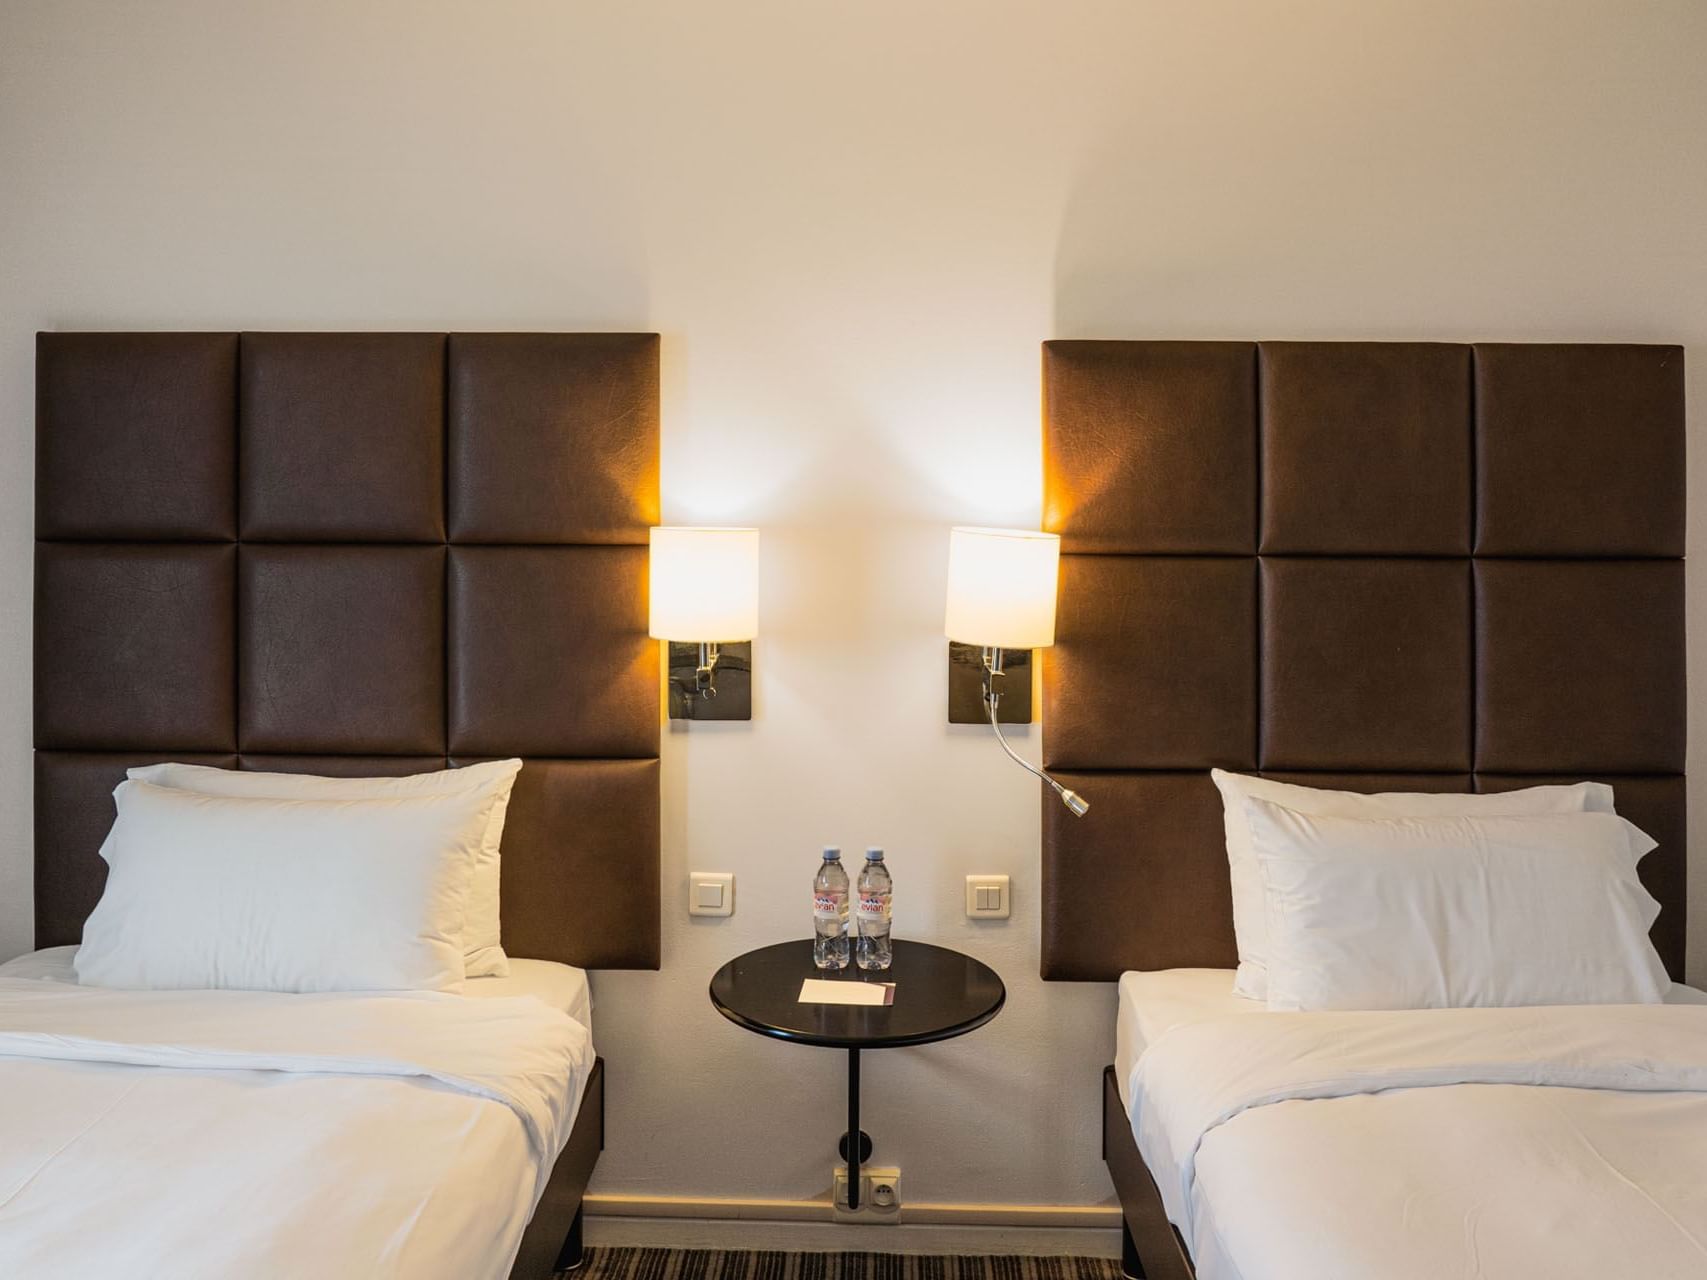 Beds with lamps in Standard Twin at The Atrium Hotel by Penta